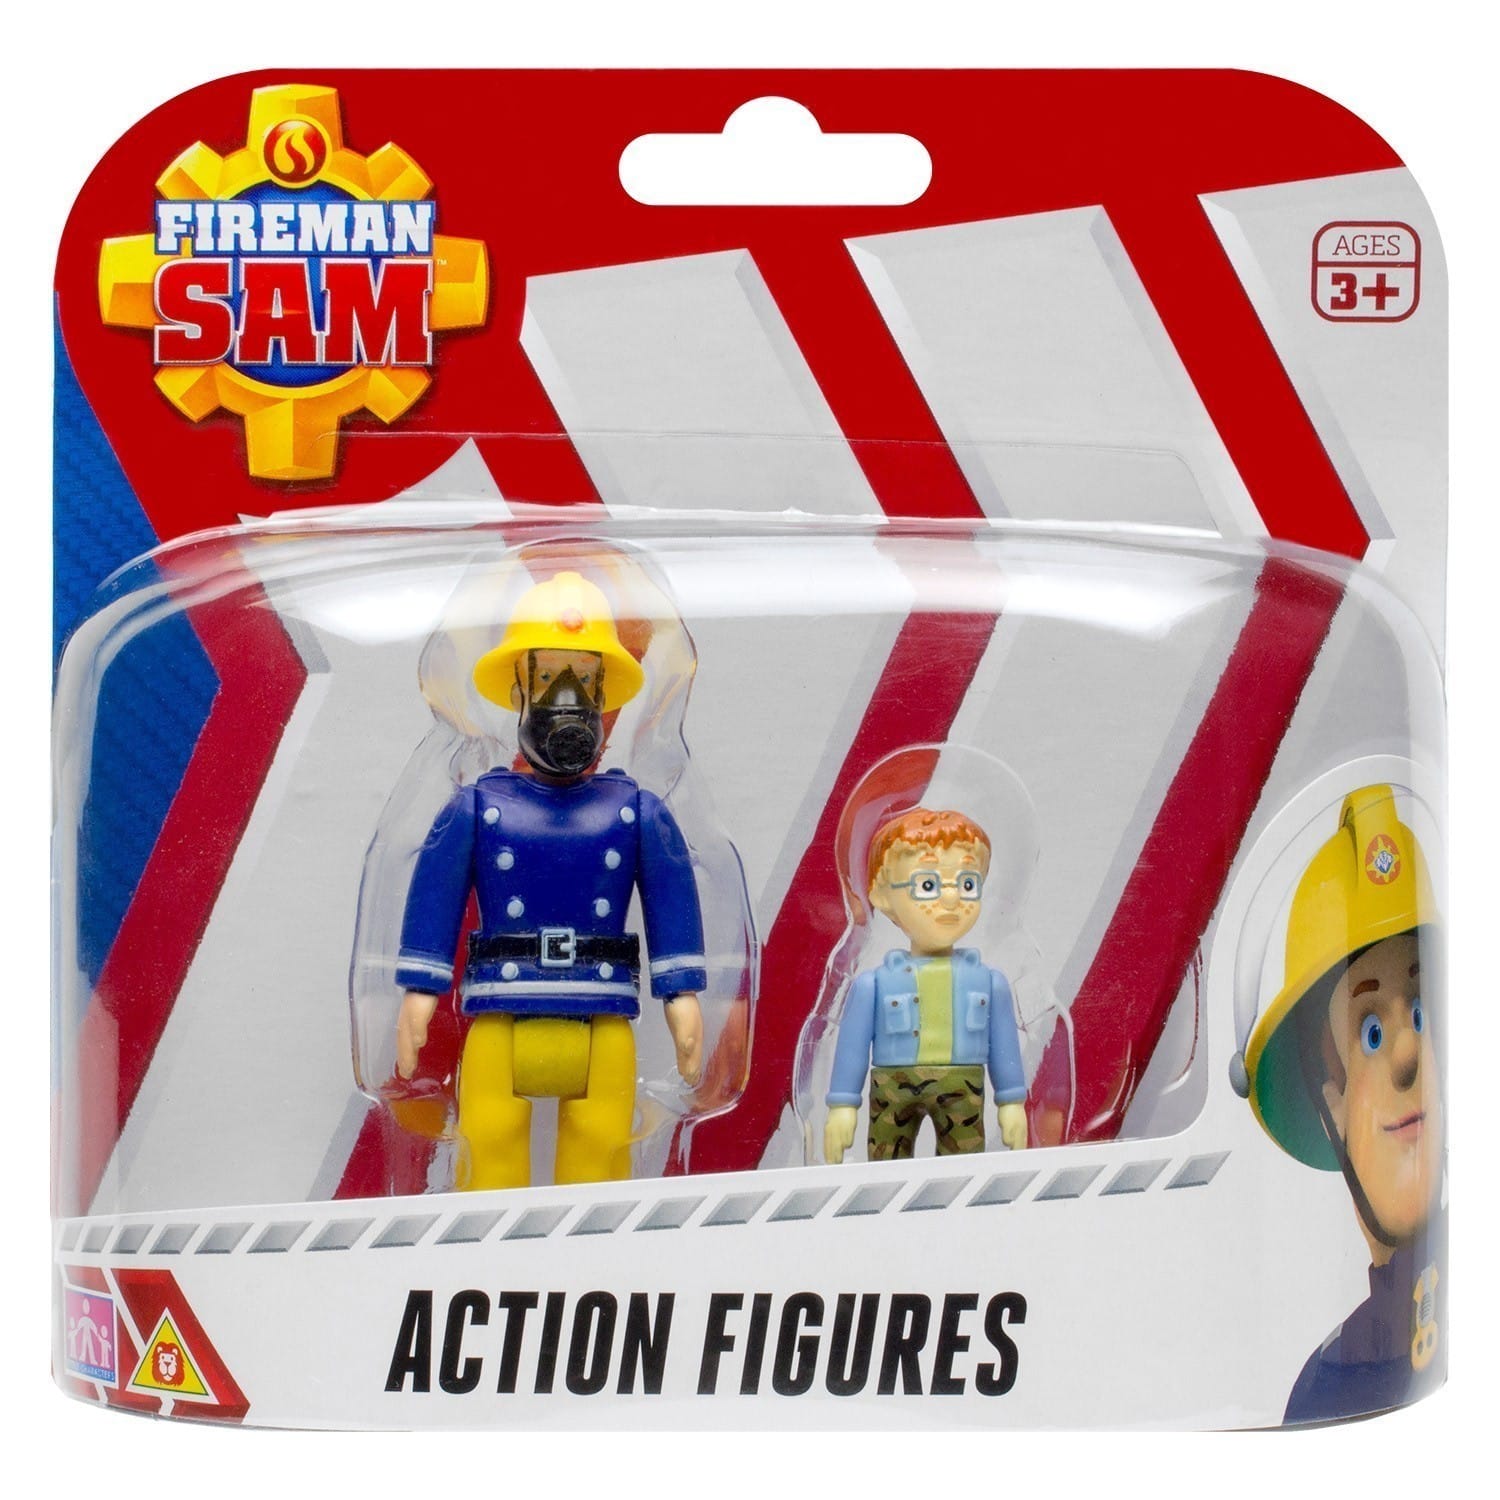 Fireman Sam - Action Figures Twin Pack - Sam With Mask & Norman